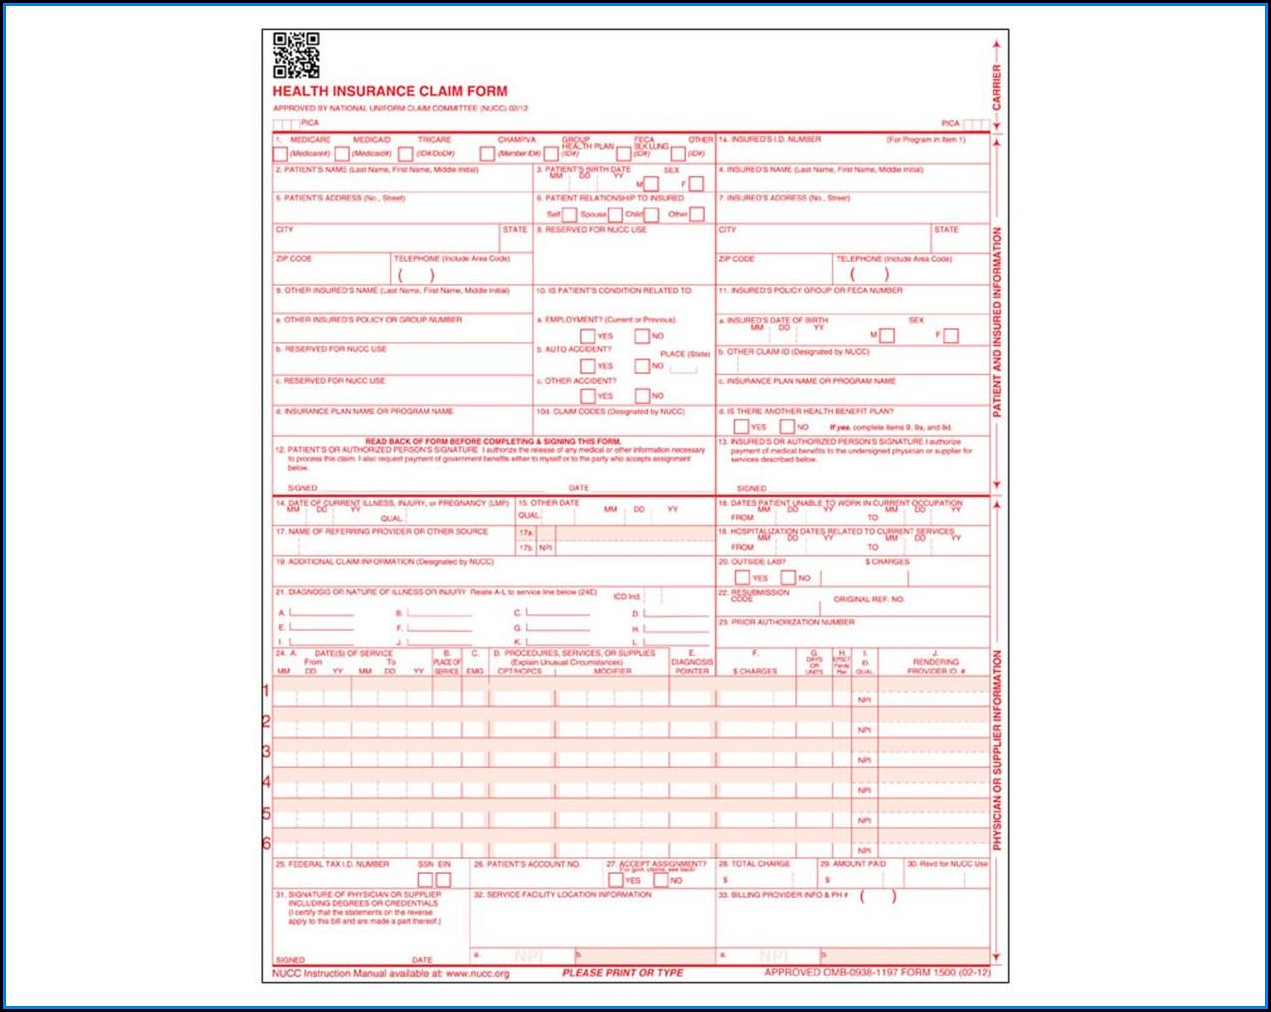 Form Cms 1500 Fillable